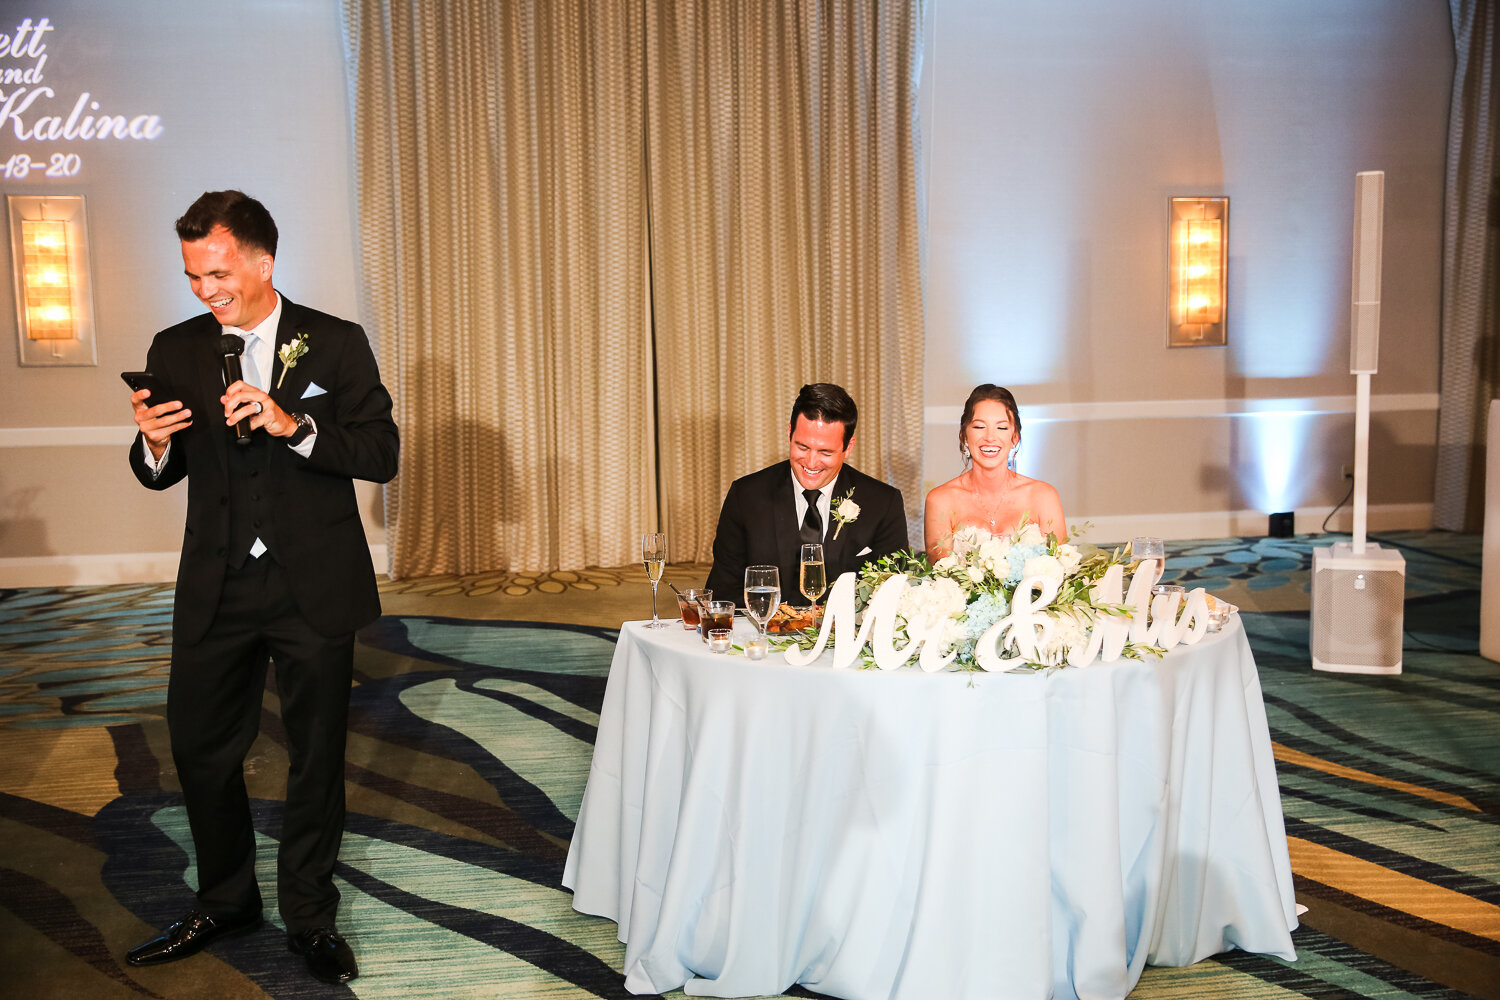 bride and groom laughing with speeches